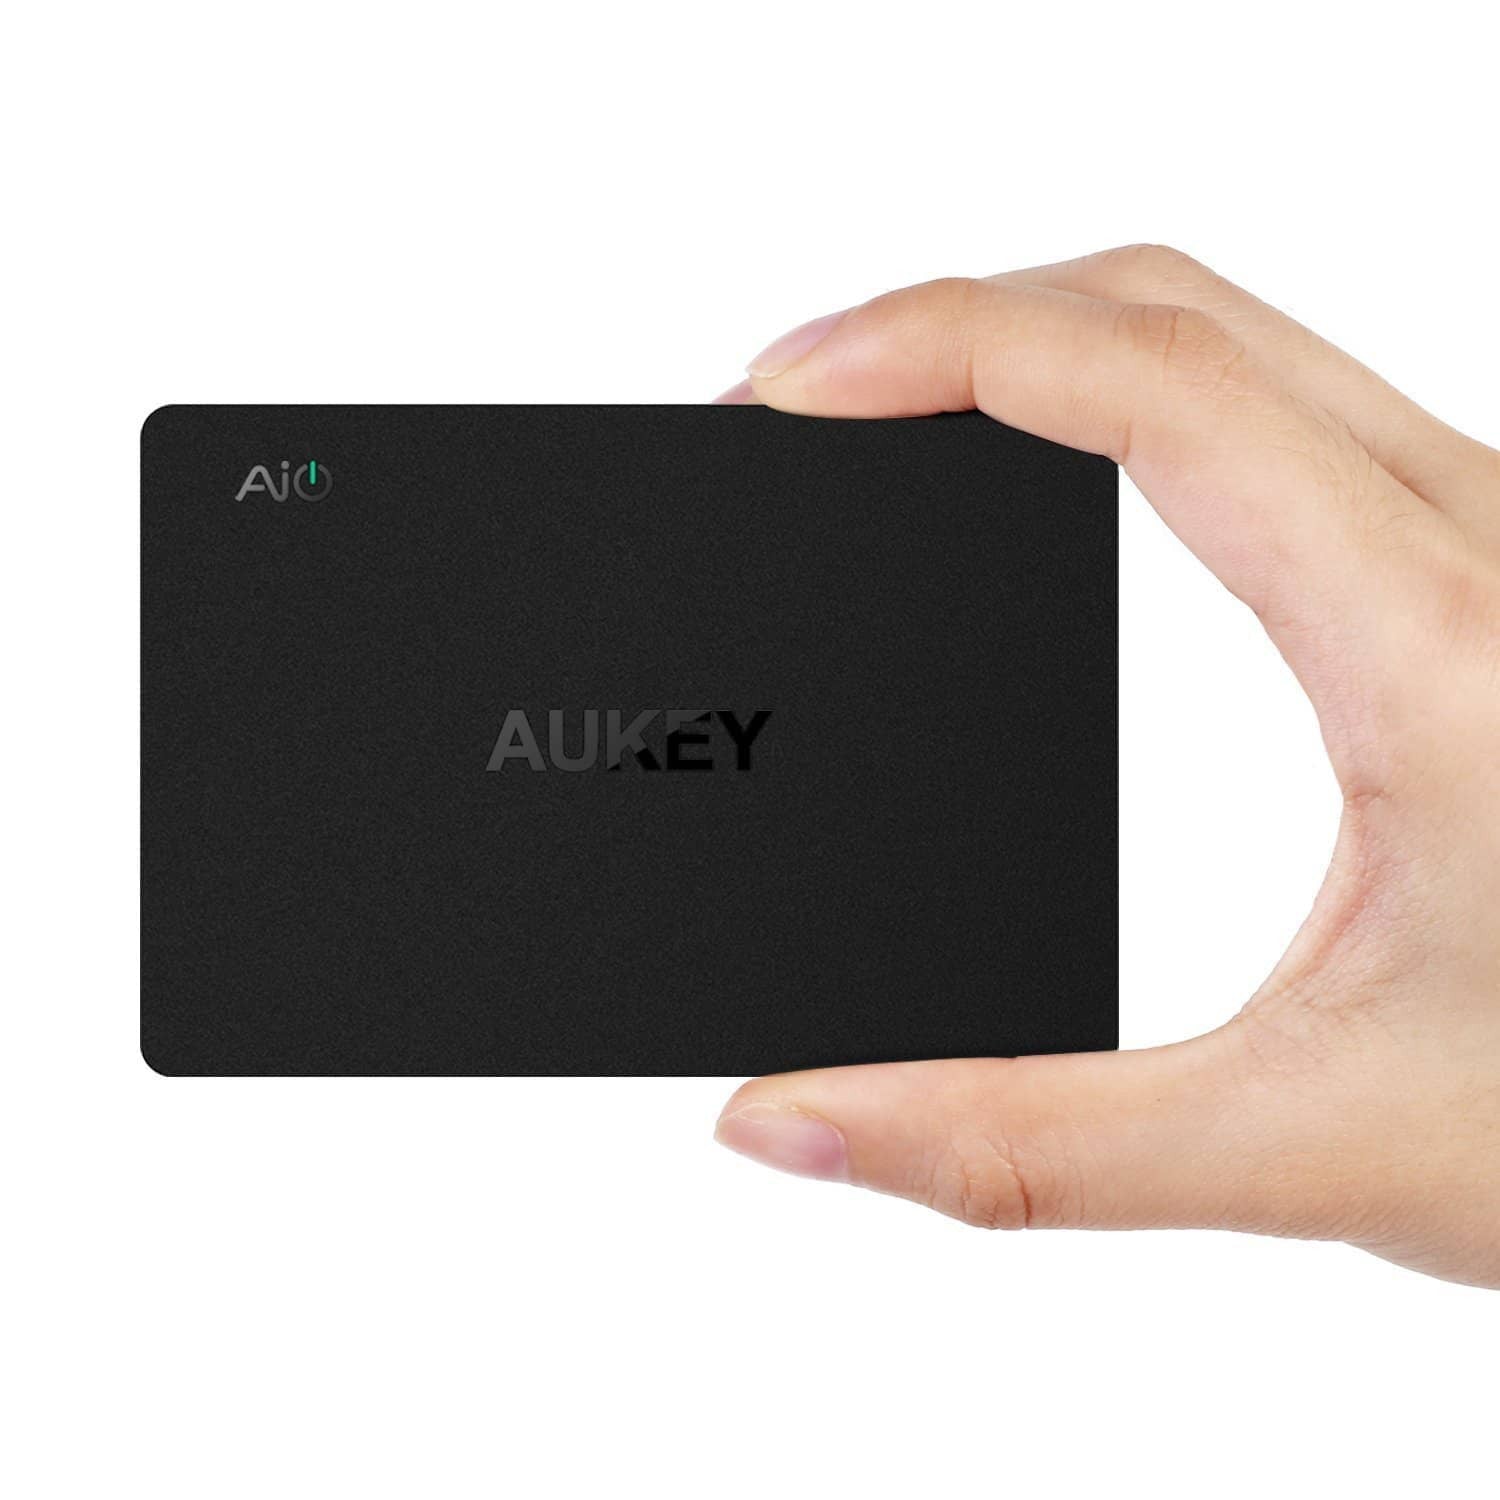 AUKEY PA-T11 6 USB Port Qualcomm Quick Charge 3.0 Desktop Charger - Aukey Malaysia Official Store